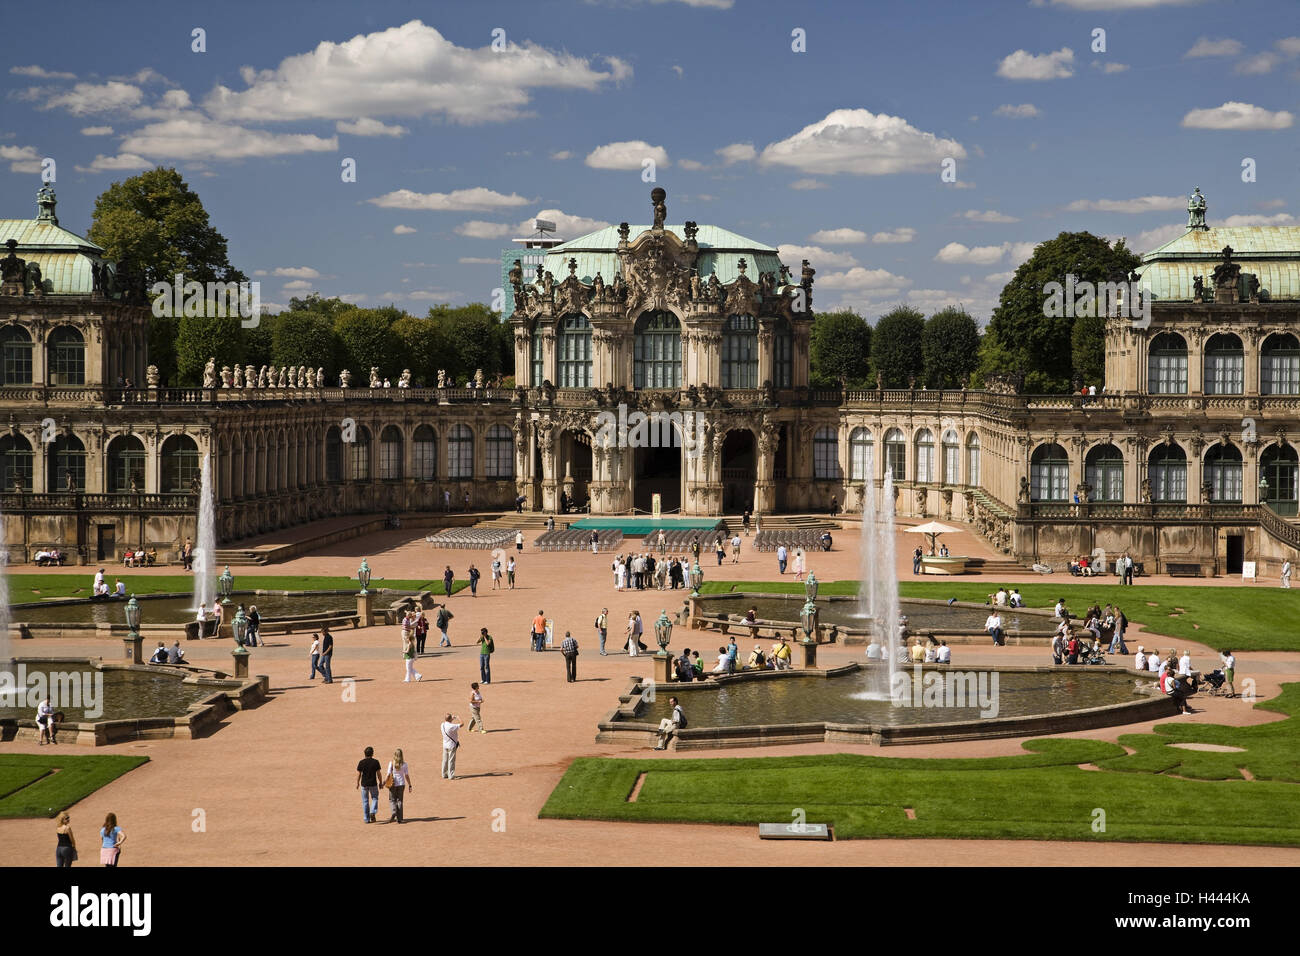 Germany, Saxony, Dresden, kennel with embankment pavilion, tourists, Stock Photo